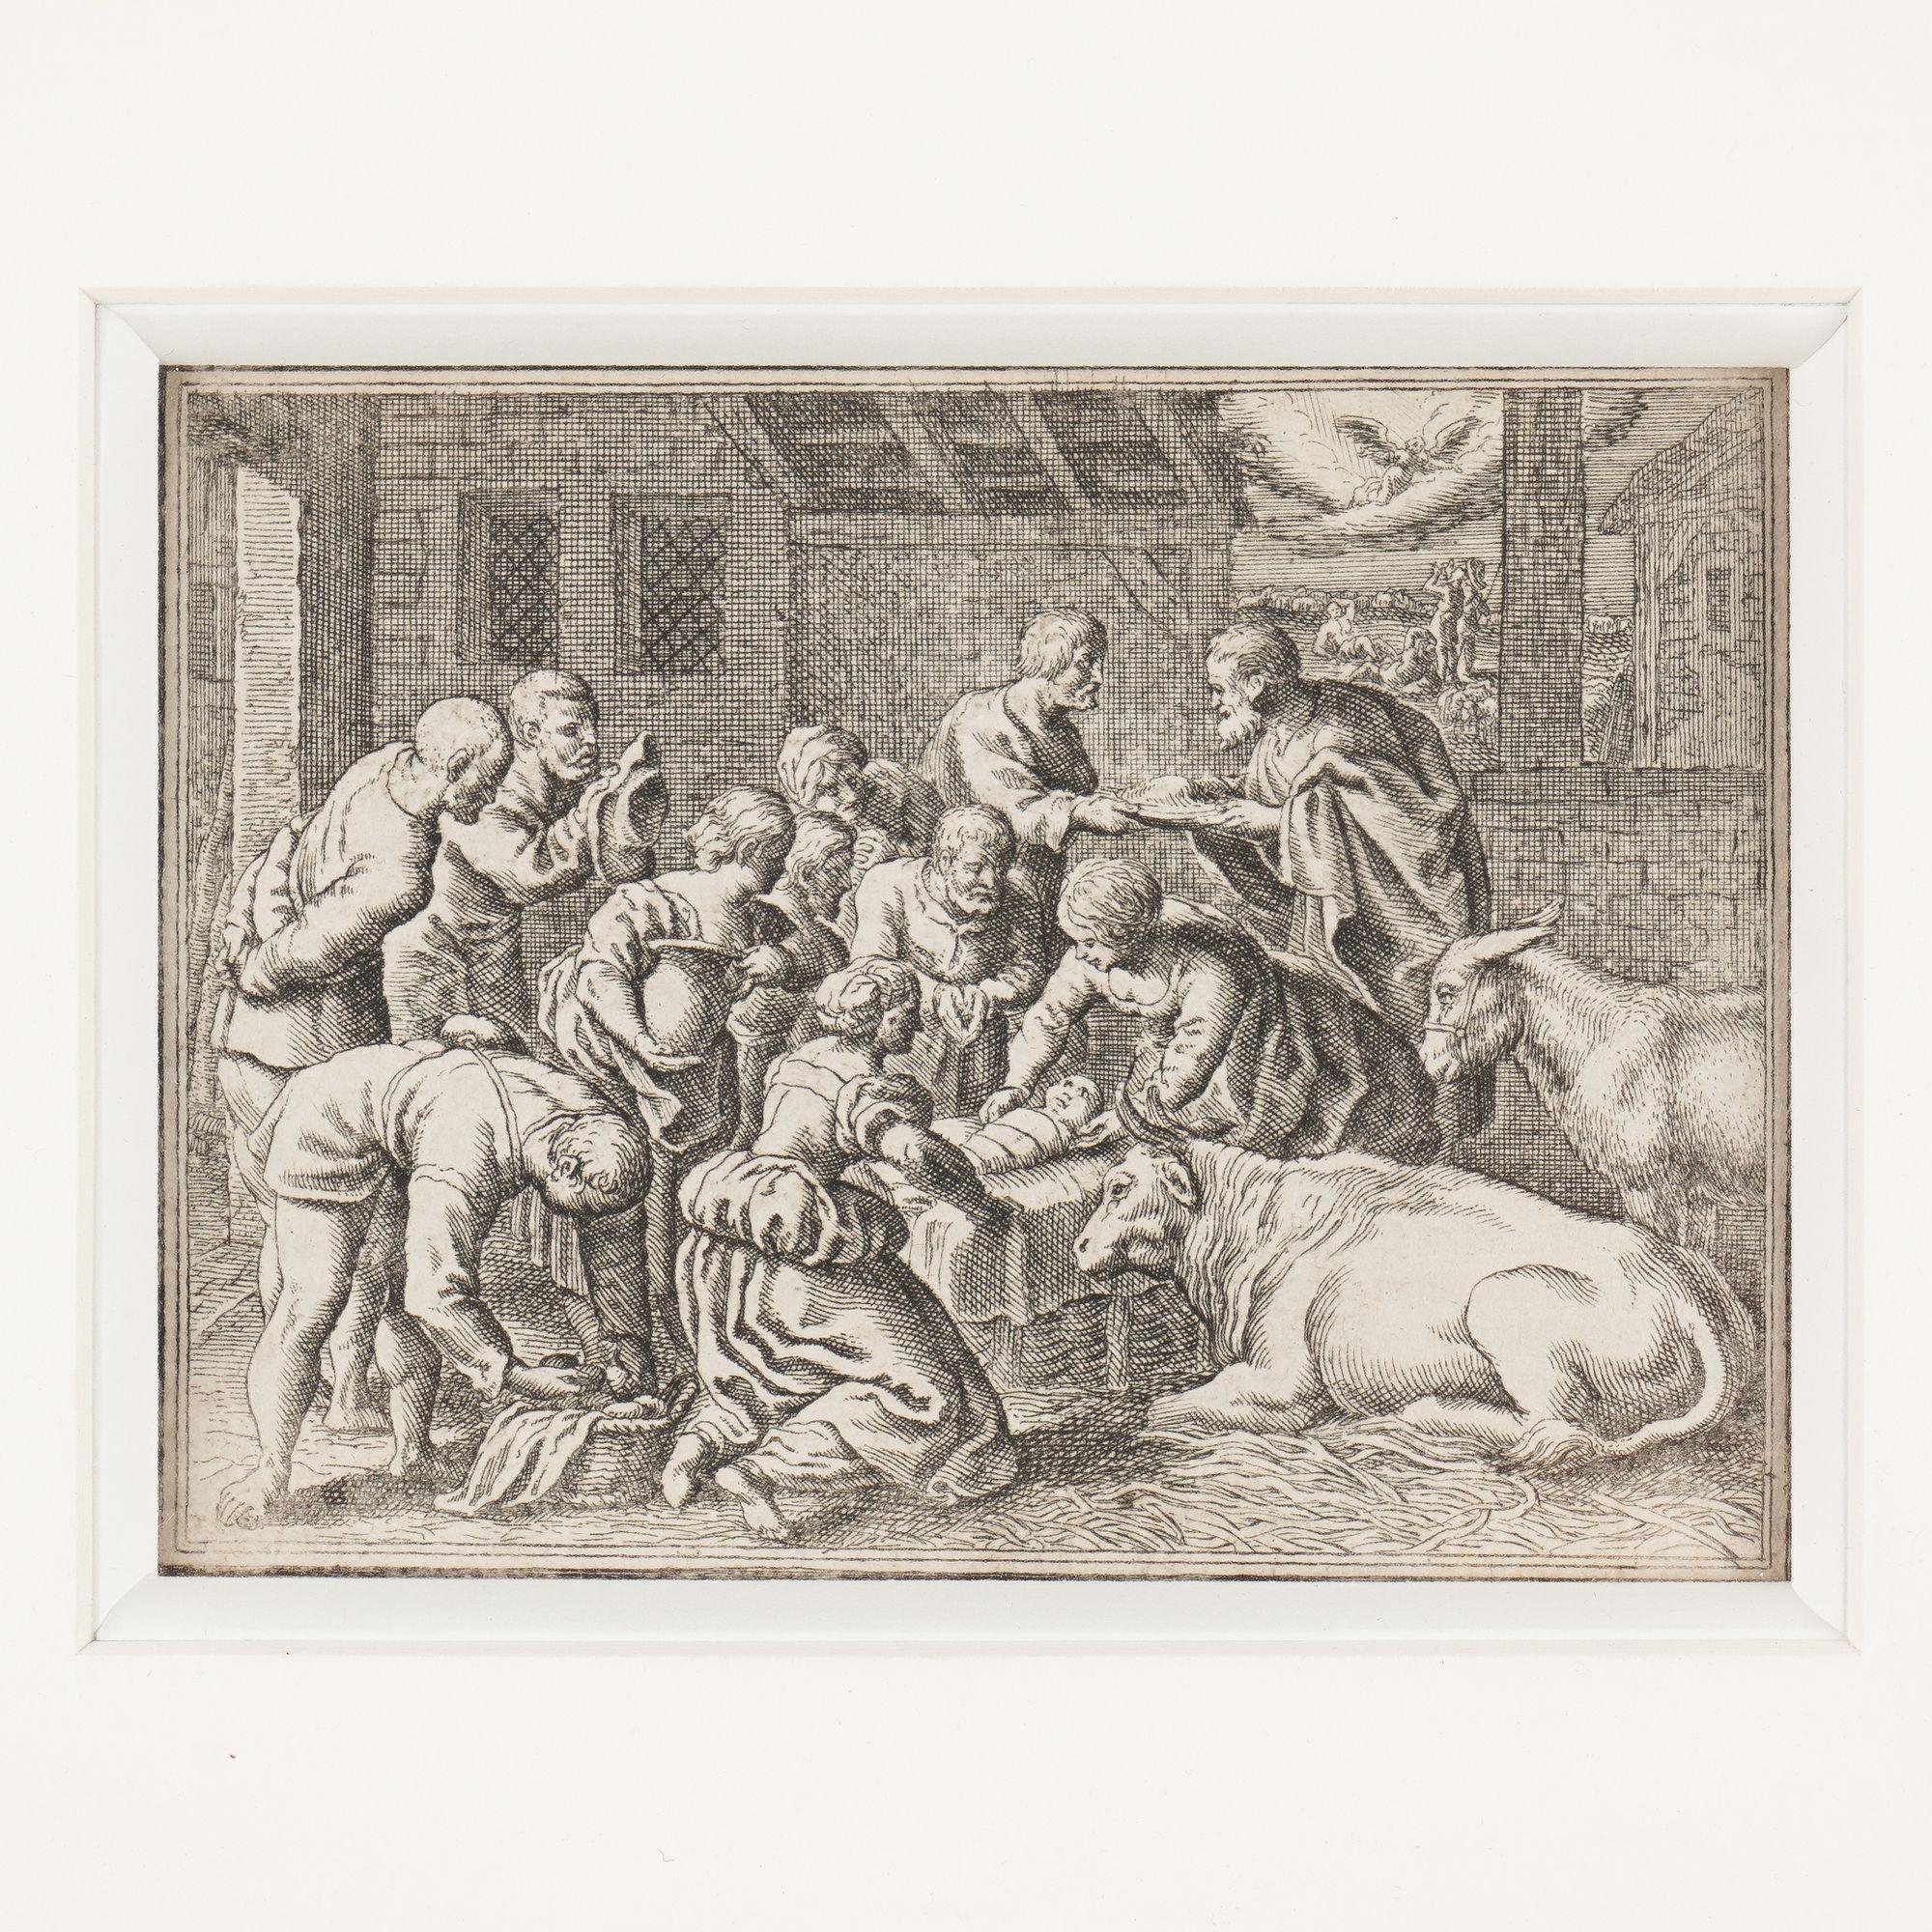 Copperplate engraving of the nativity printed on hand laid paper. The piece has an incredible level of fine detail for the diminutive size of the work.
German, circa 17th century.